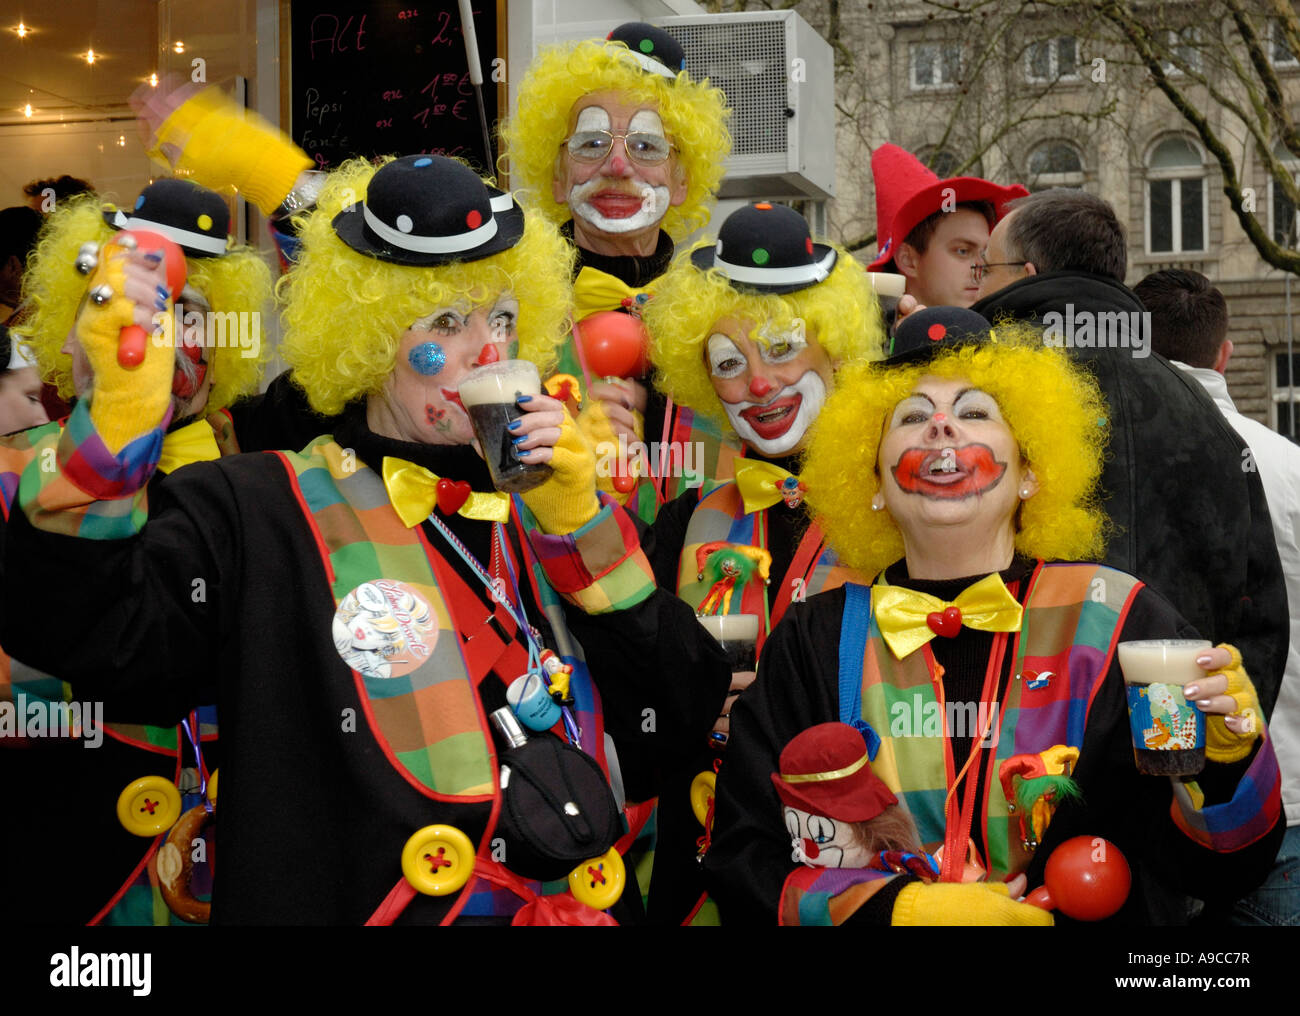 group-of-5-clowns-with-yellow-wigs-drink